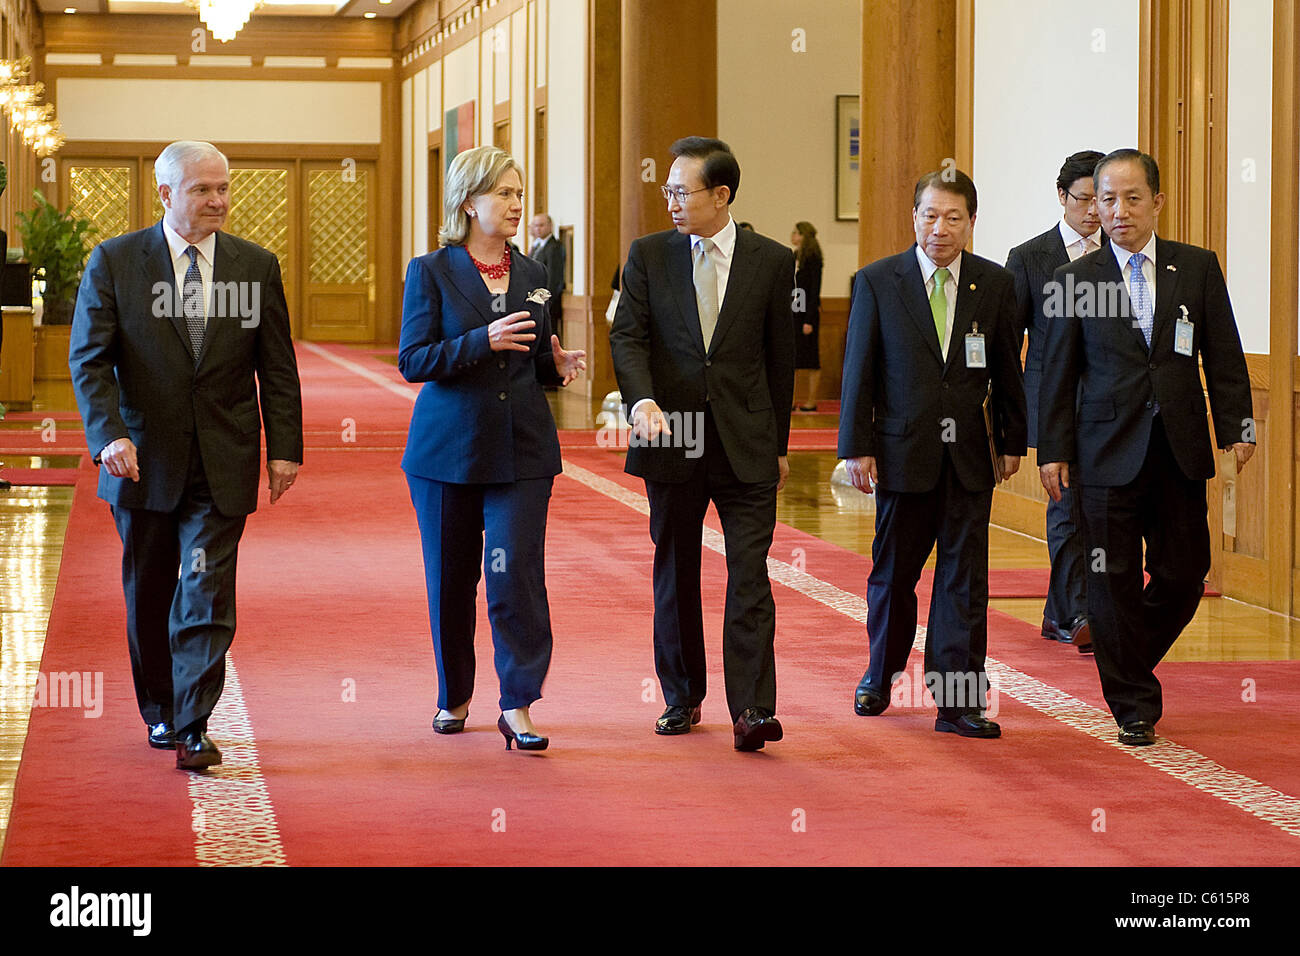 Robert Gates Hillary Clinton South Korean President Lee Myung-bak South Korean Foreign Minister Yu Myung-hwan and South Korean Defense Minister Kim Tae-young in the presidential house in Seoul South Korea. July 21 2010. (BSLOC 2011 12 206) Stock Photo